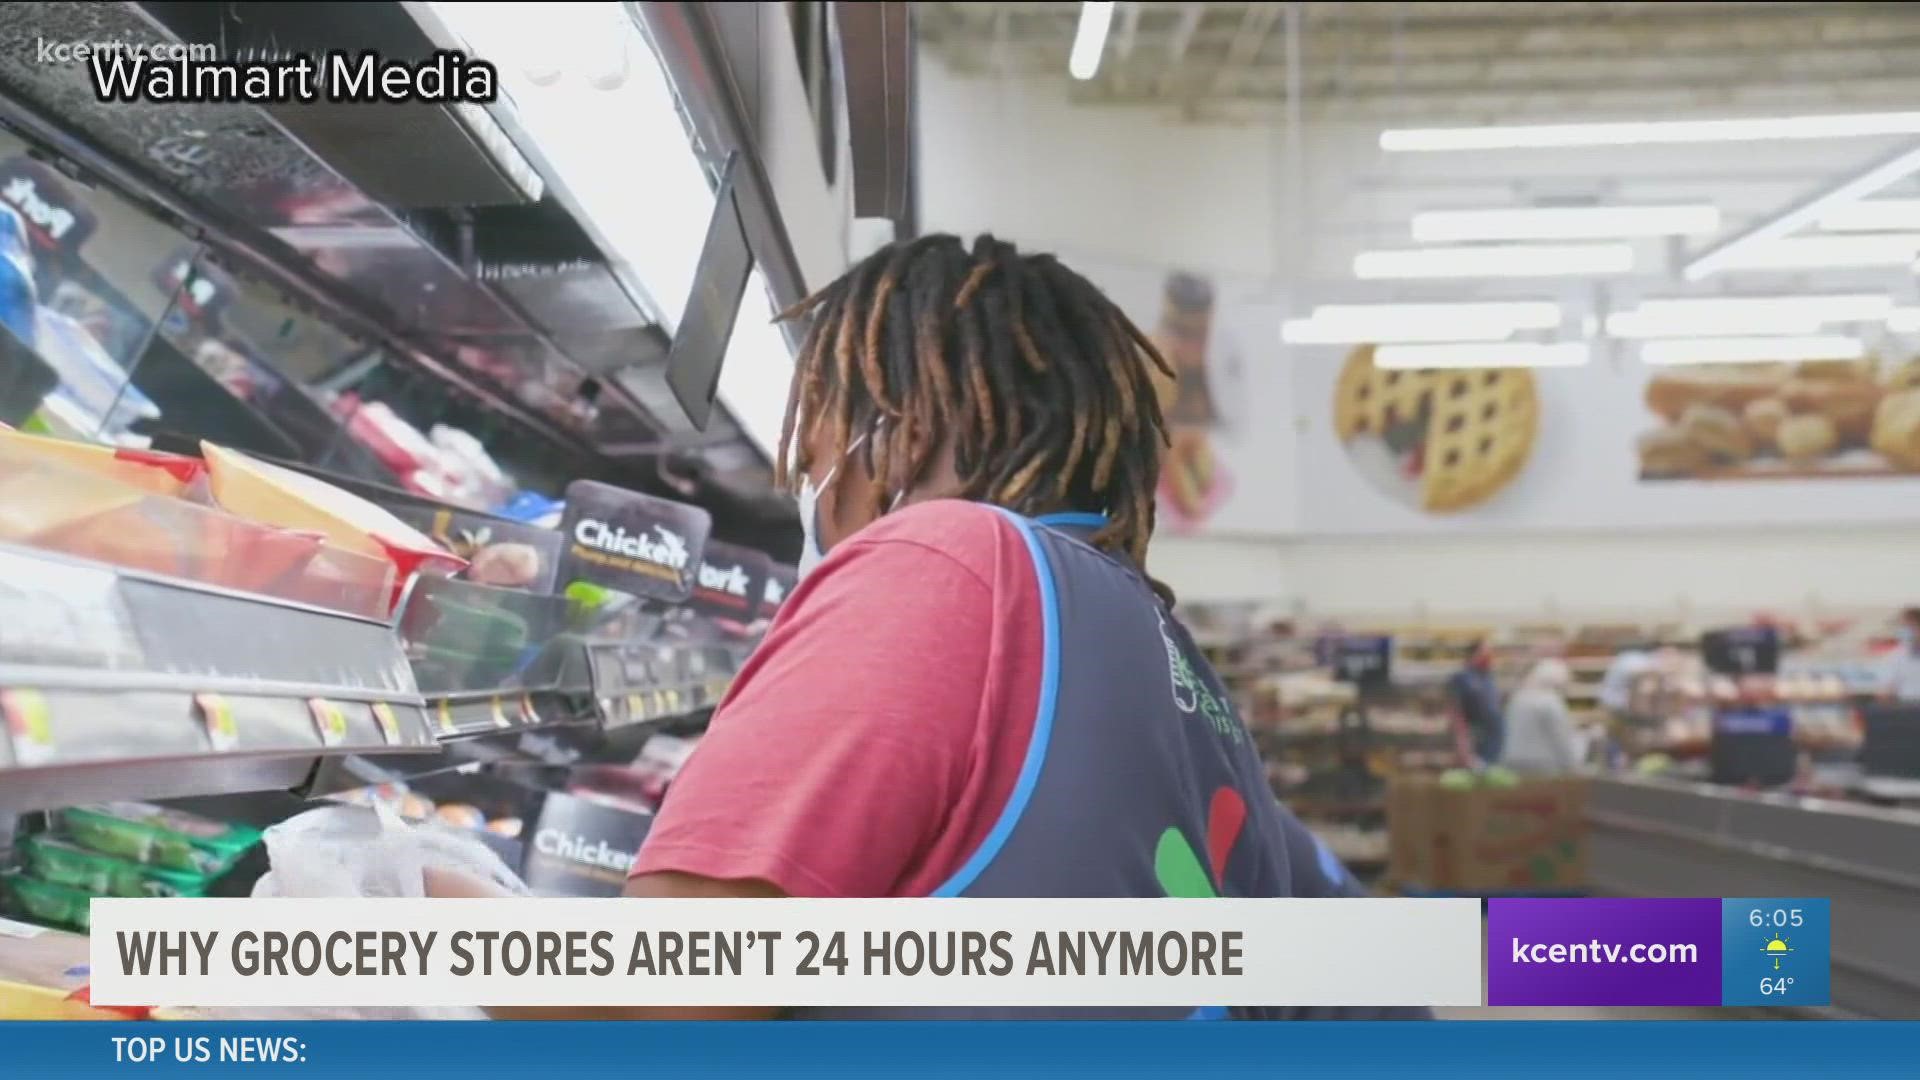 With people buying food for Thanksgiving, and it being ahead of Black Friday, 6 News wanted to know if big stores like HEB or Walmart plan to go to 24 hours.